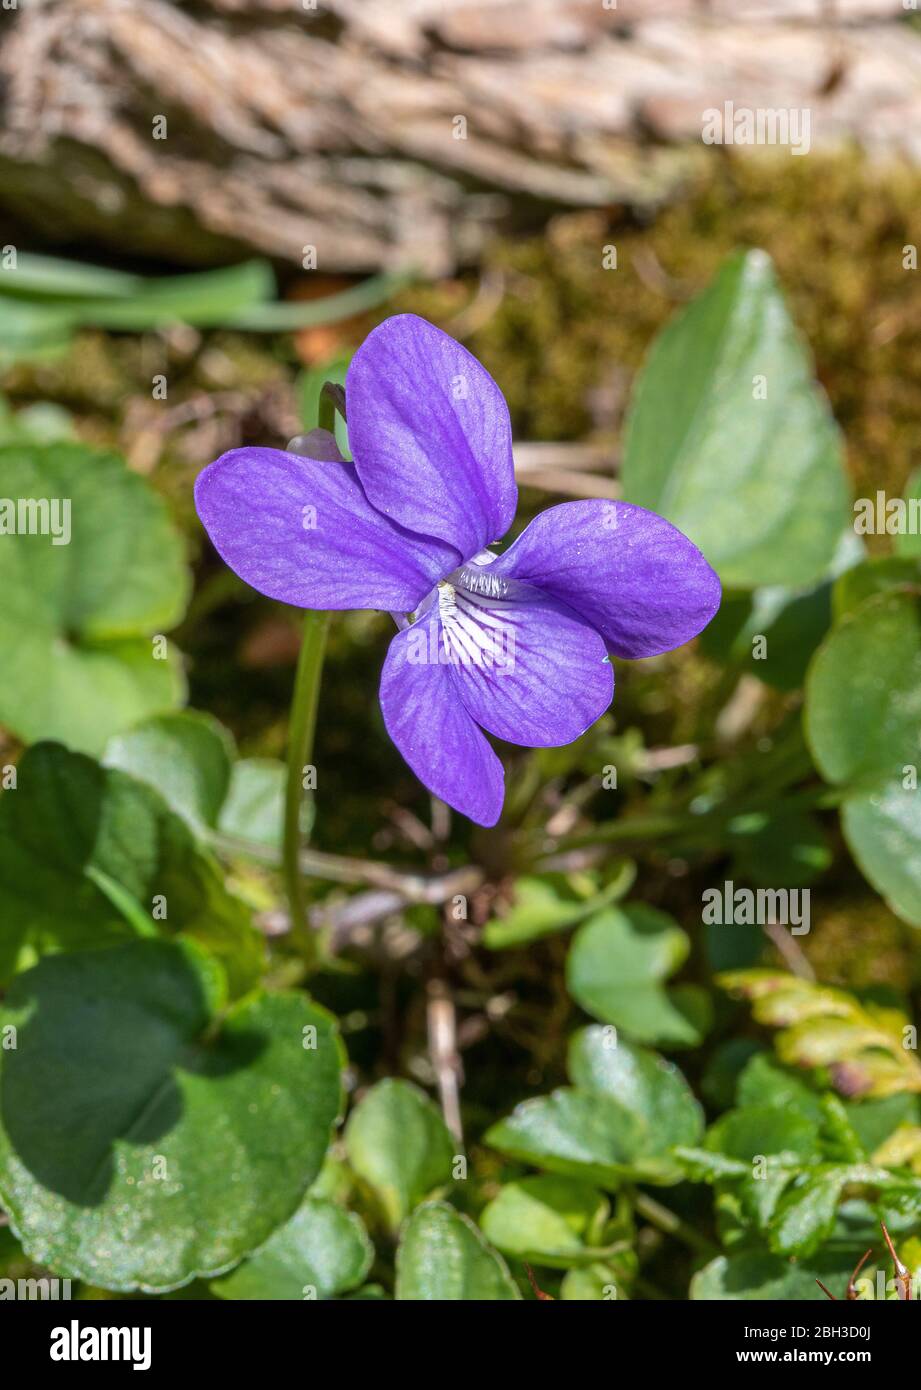 A Common Dog Violet Flower in Bloom in a Garden in Alsager Cheshire England United Kingdom UK Stock Photo